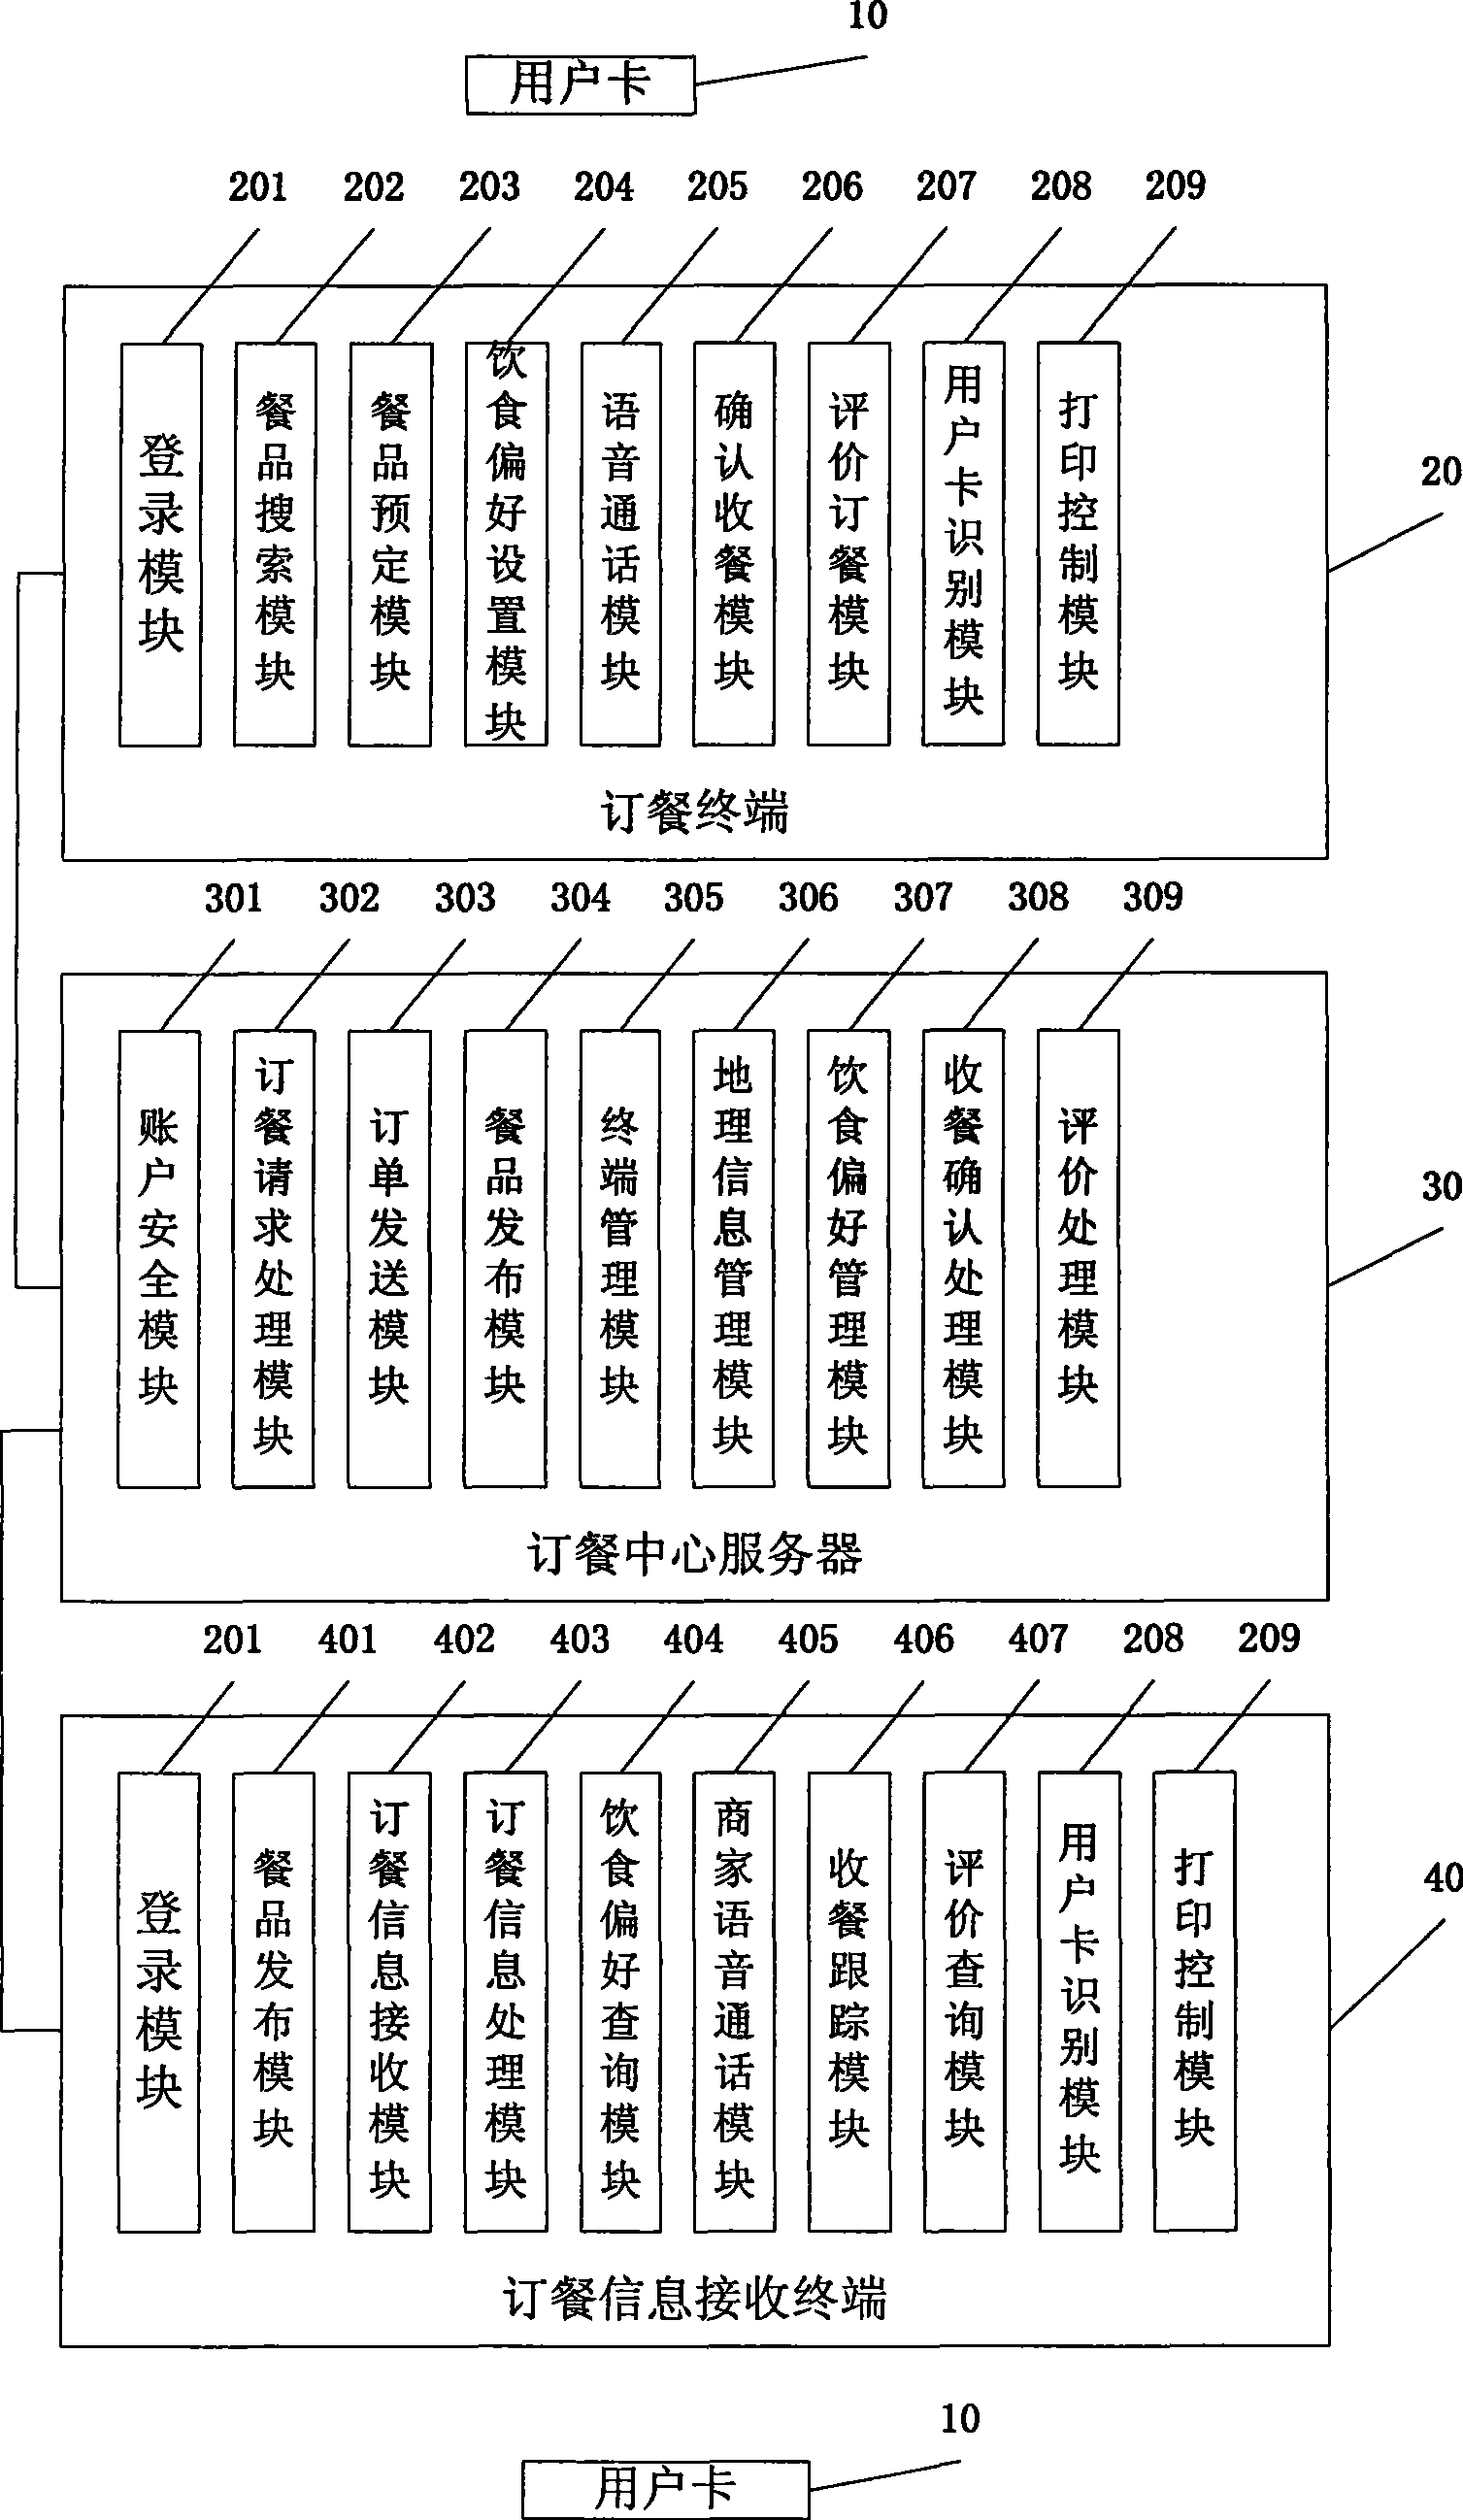 Network ordering system and method